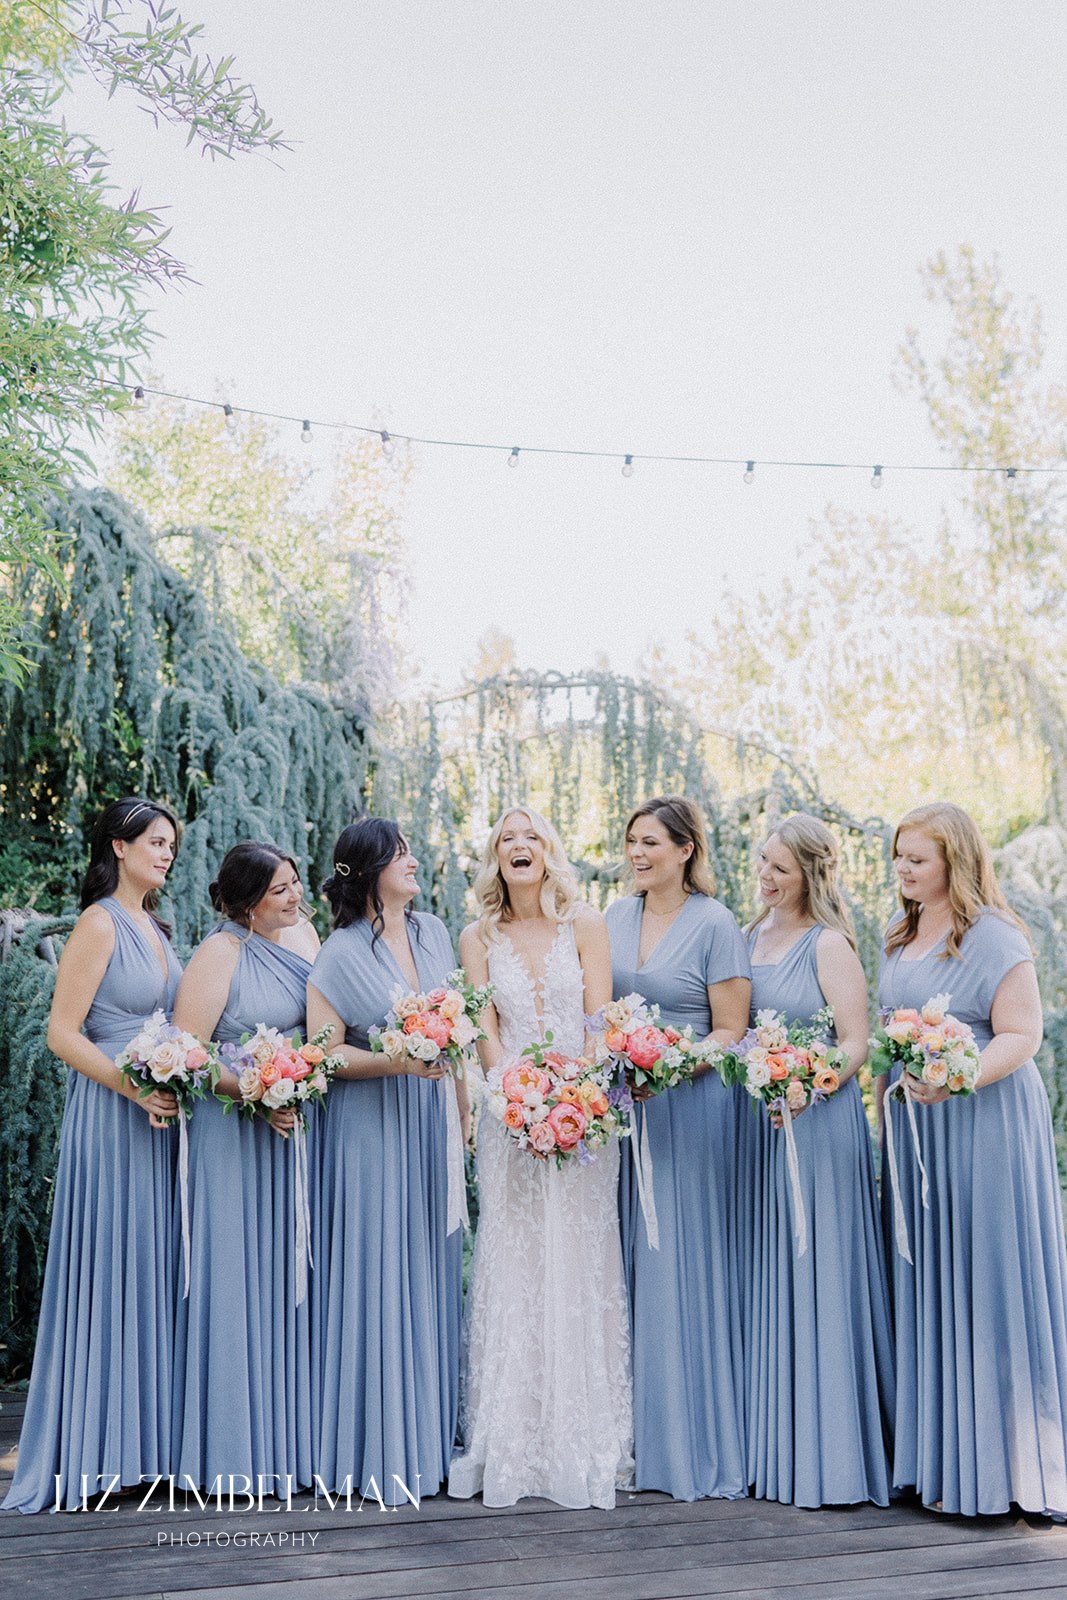 Bride with bridemaids in blue dresses